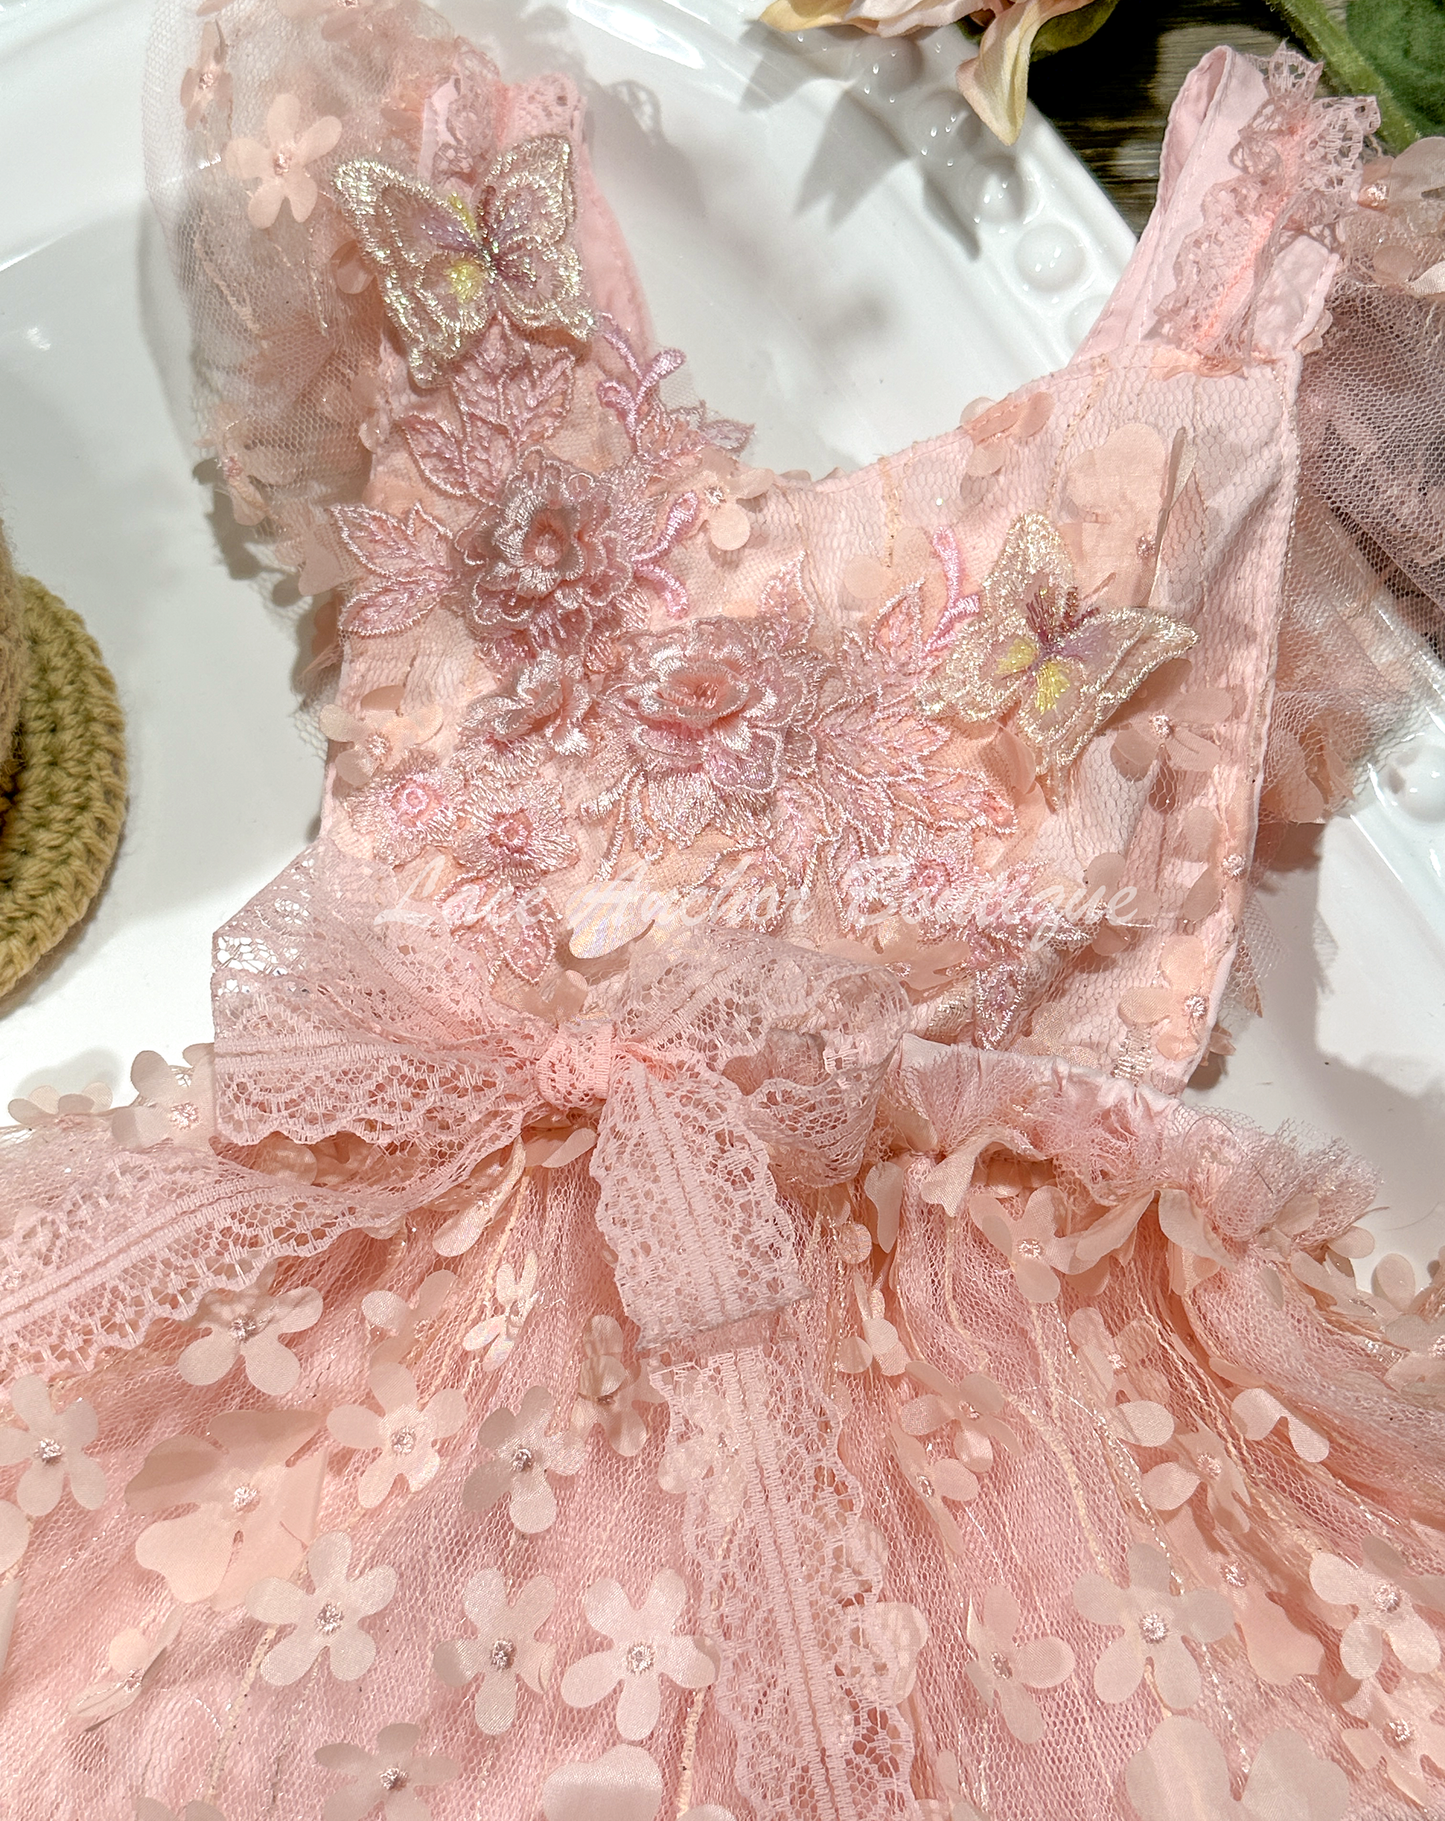 light coral pink baby girls floral tulle romper with embroidered flowers and embroidered 3d butterflies. Ruffled trim and lace bow.